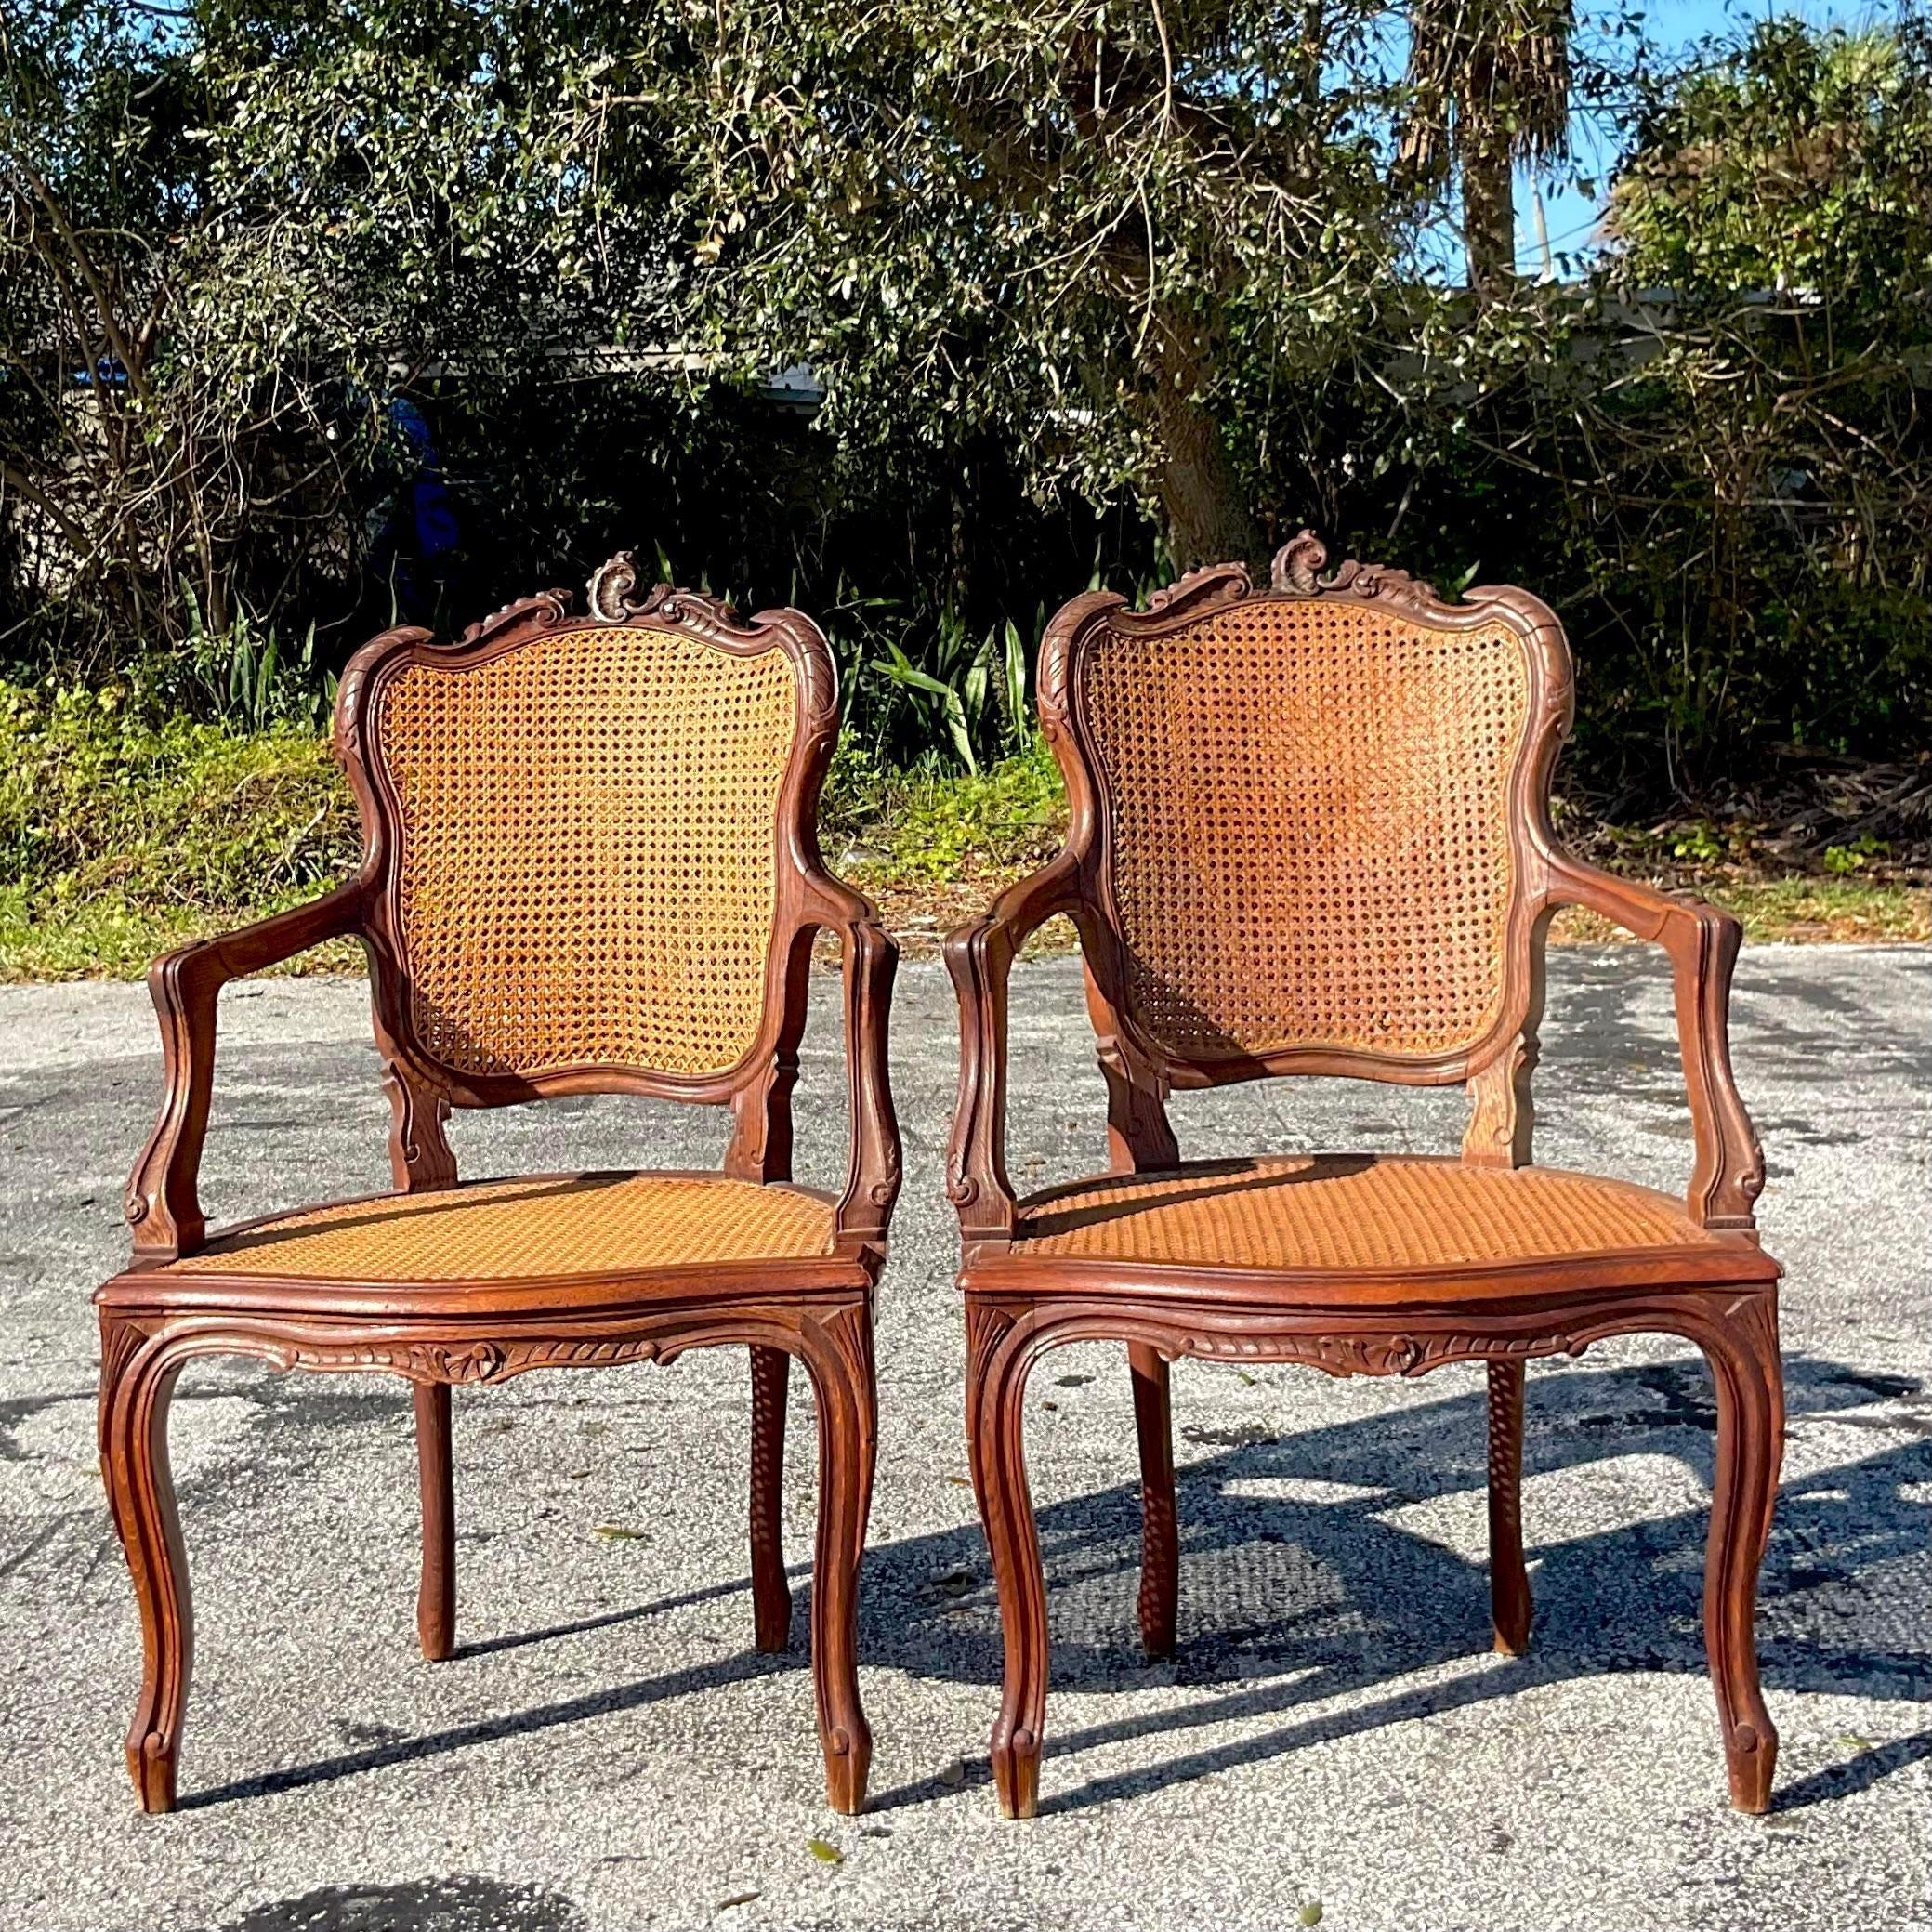 Vintage Boho Carved Wooden Chairs With Inset Cane Panels - a Pair In Good Condition For Sale In west palm beach, FL